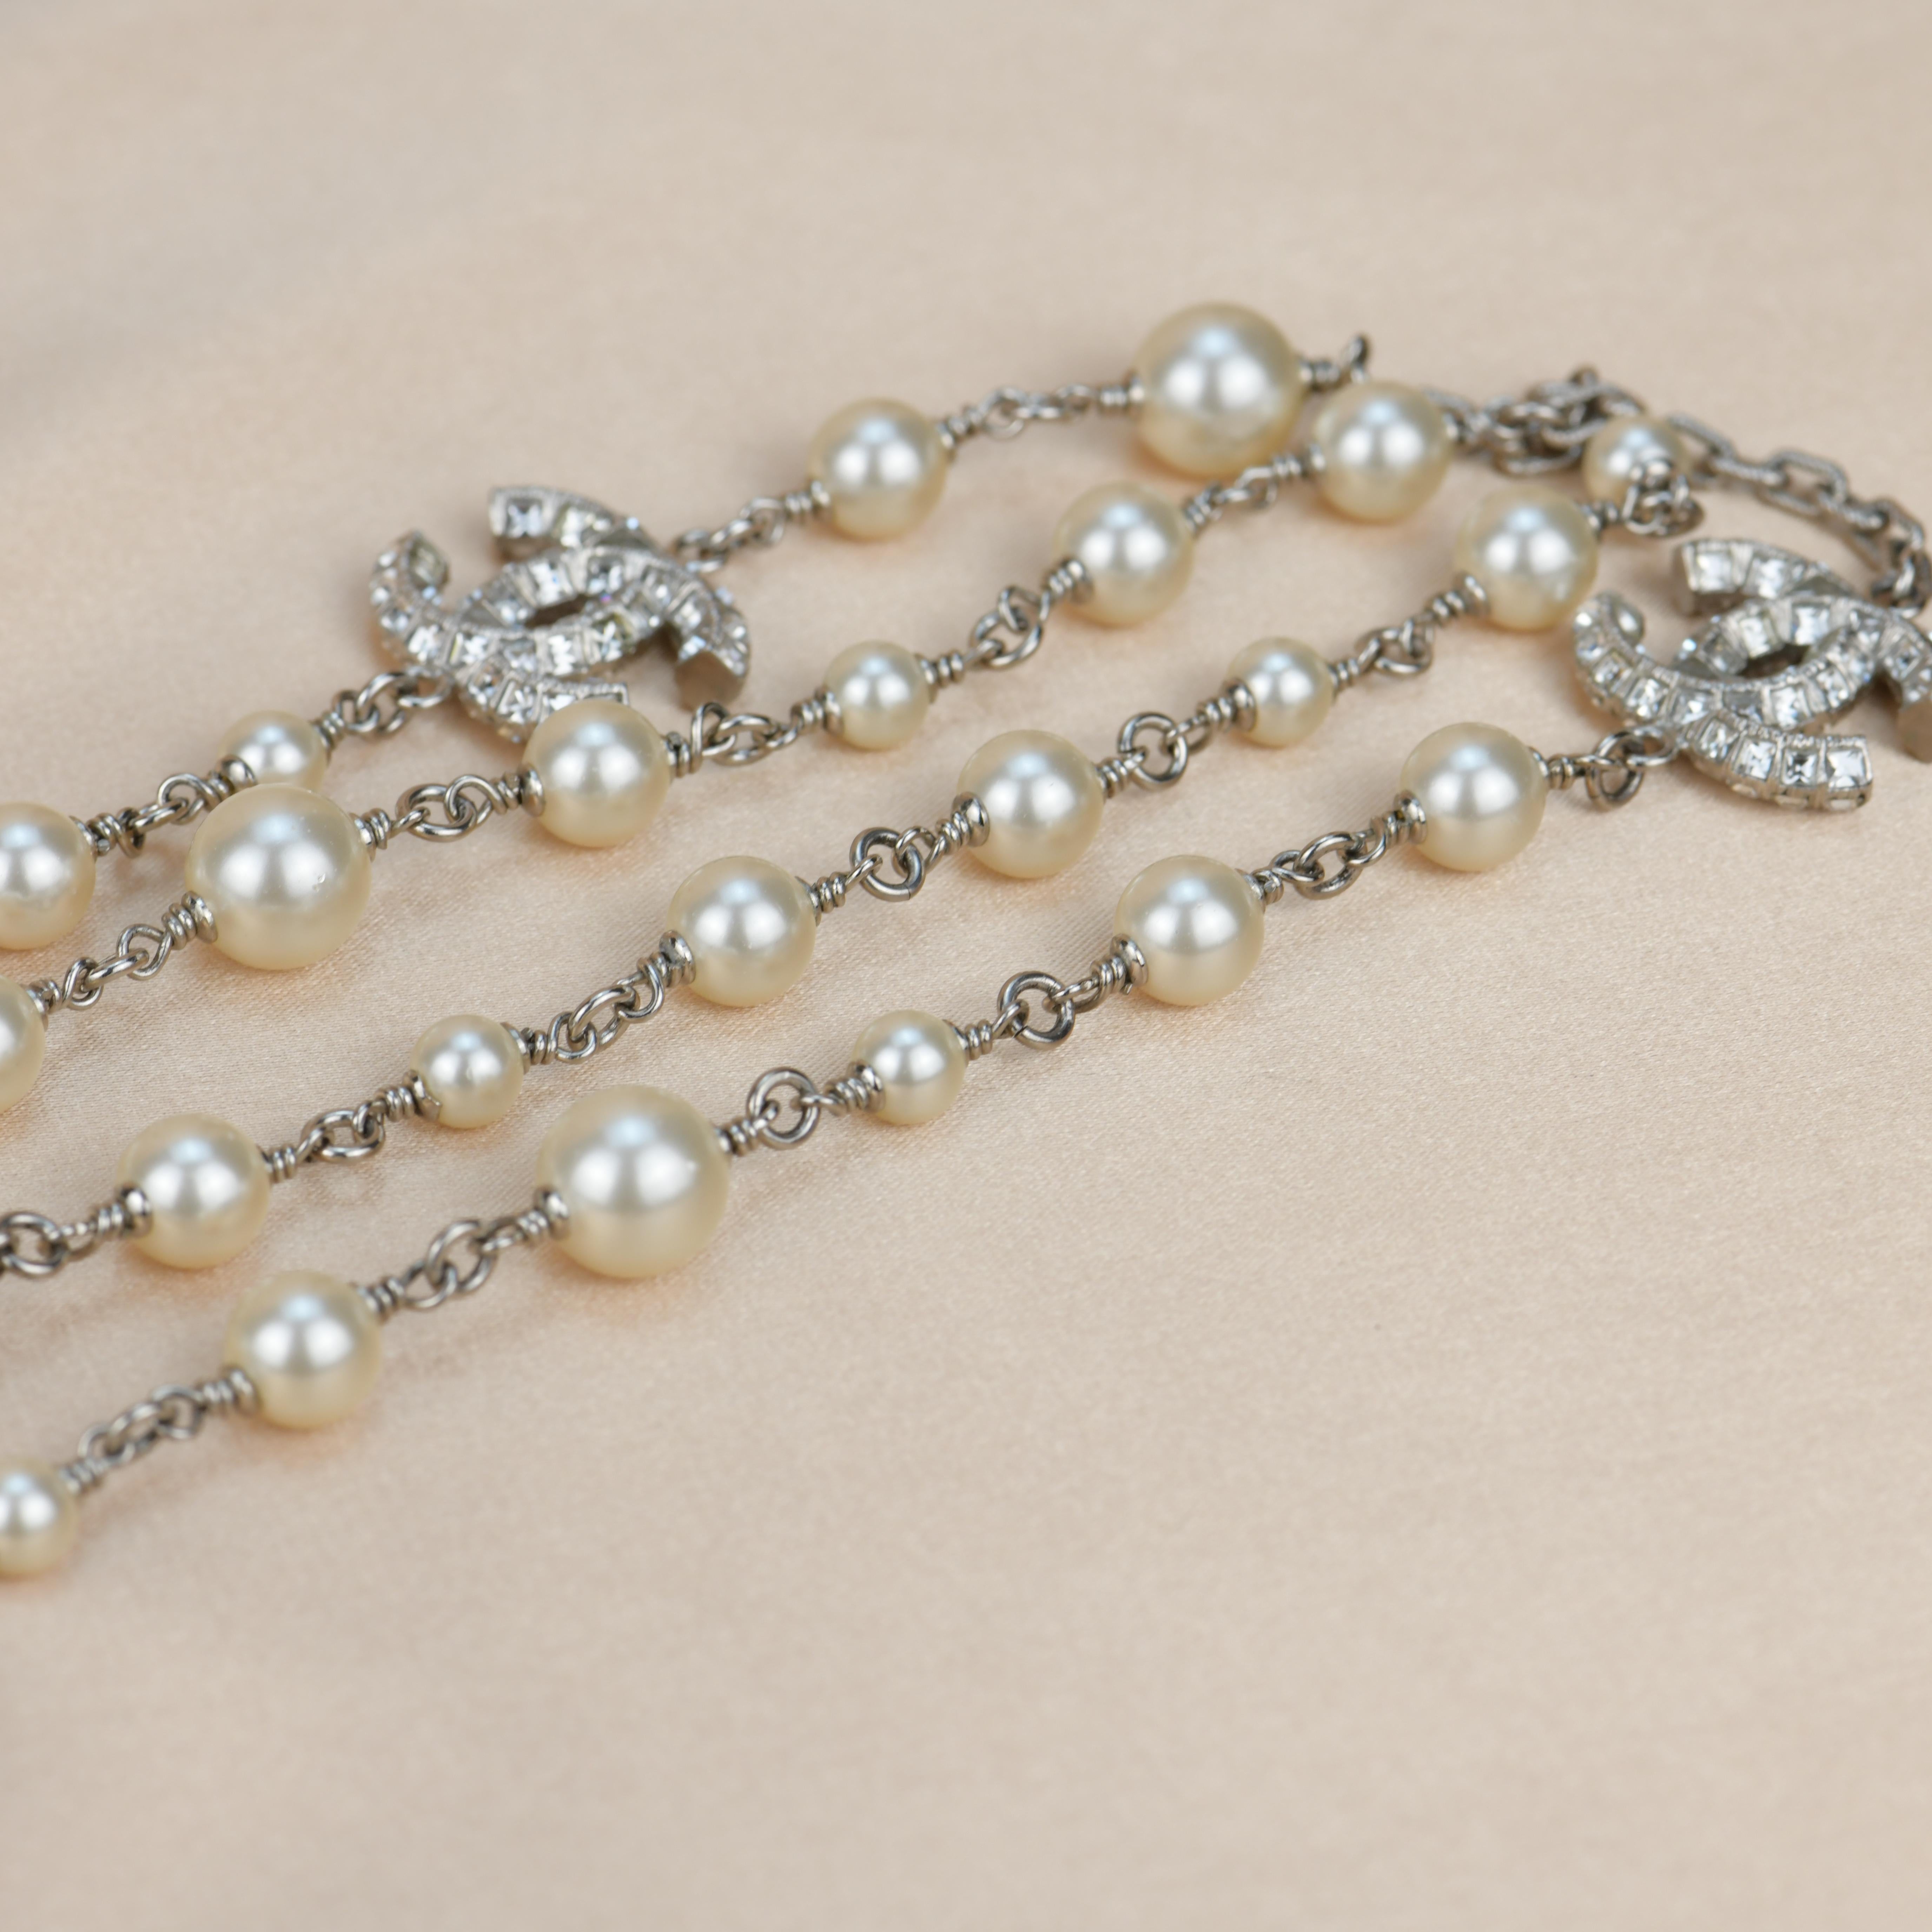 Women's or Men's Chanel CC White Pearl and Crystal Long Necklace